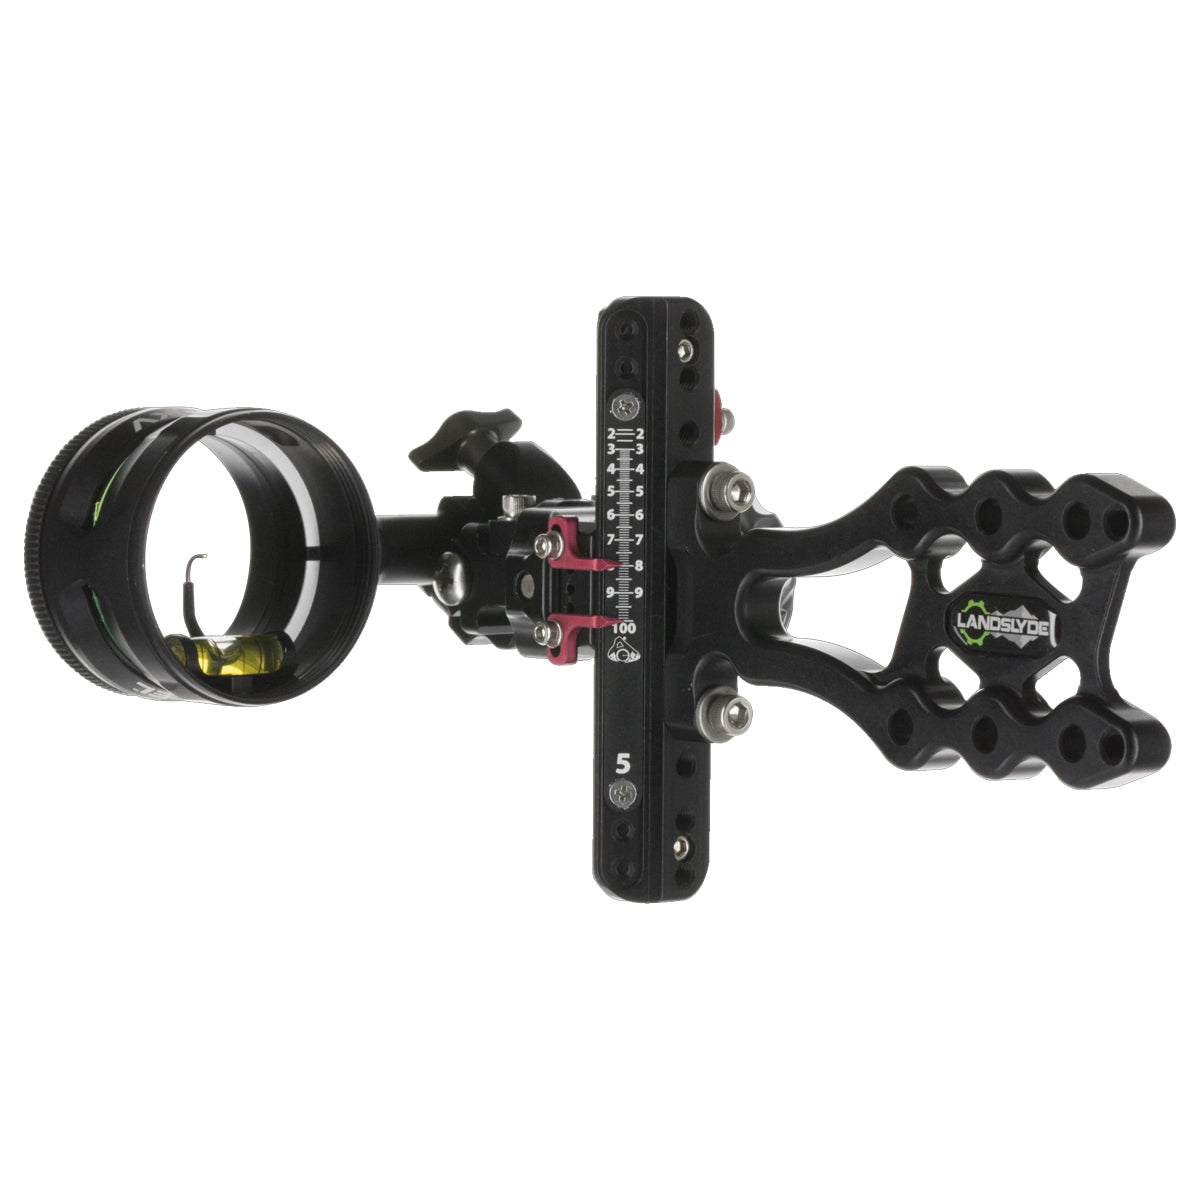 Axcel Landslyde Direct Single Pin Bow Sight in  by GOHUNT | Axcel - GOHUNT Shop